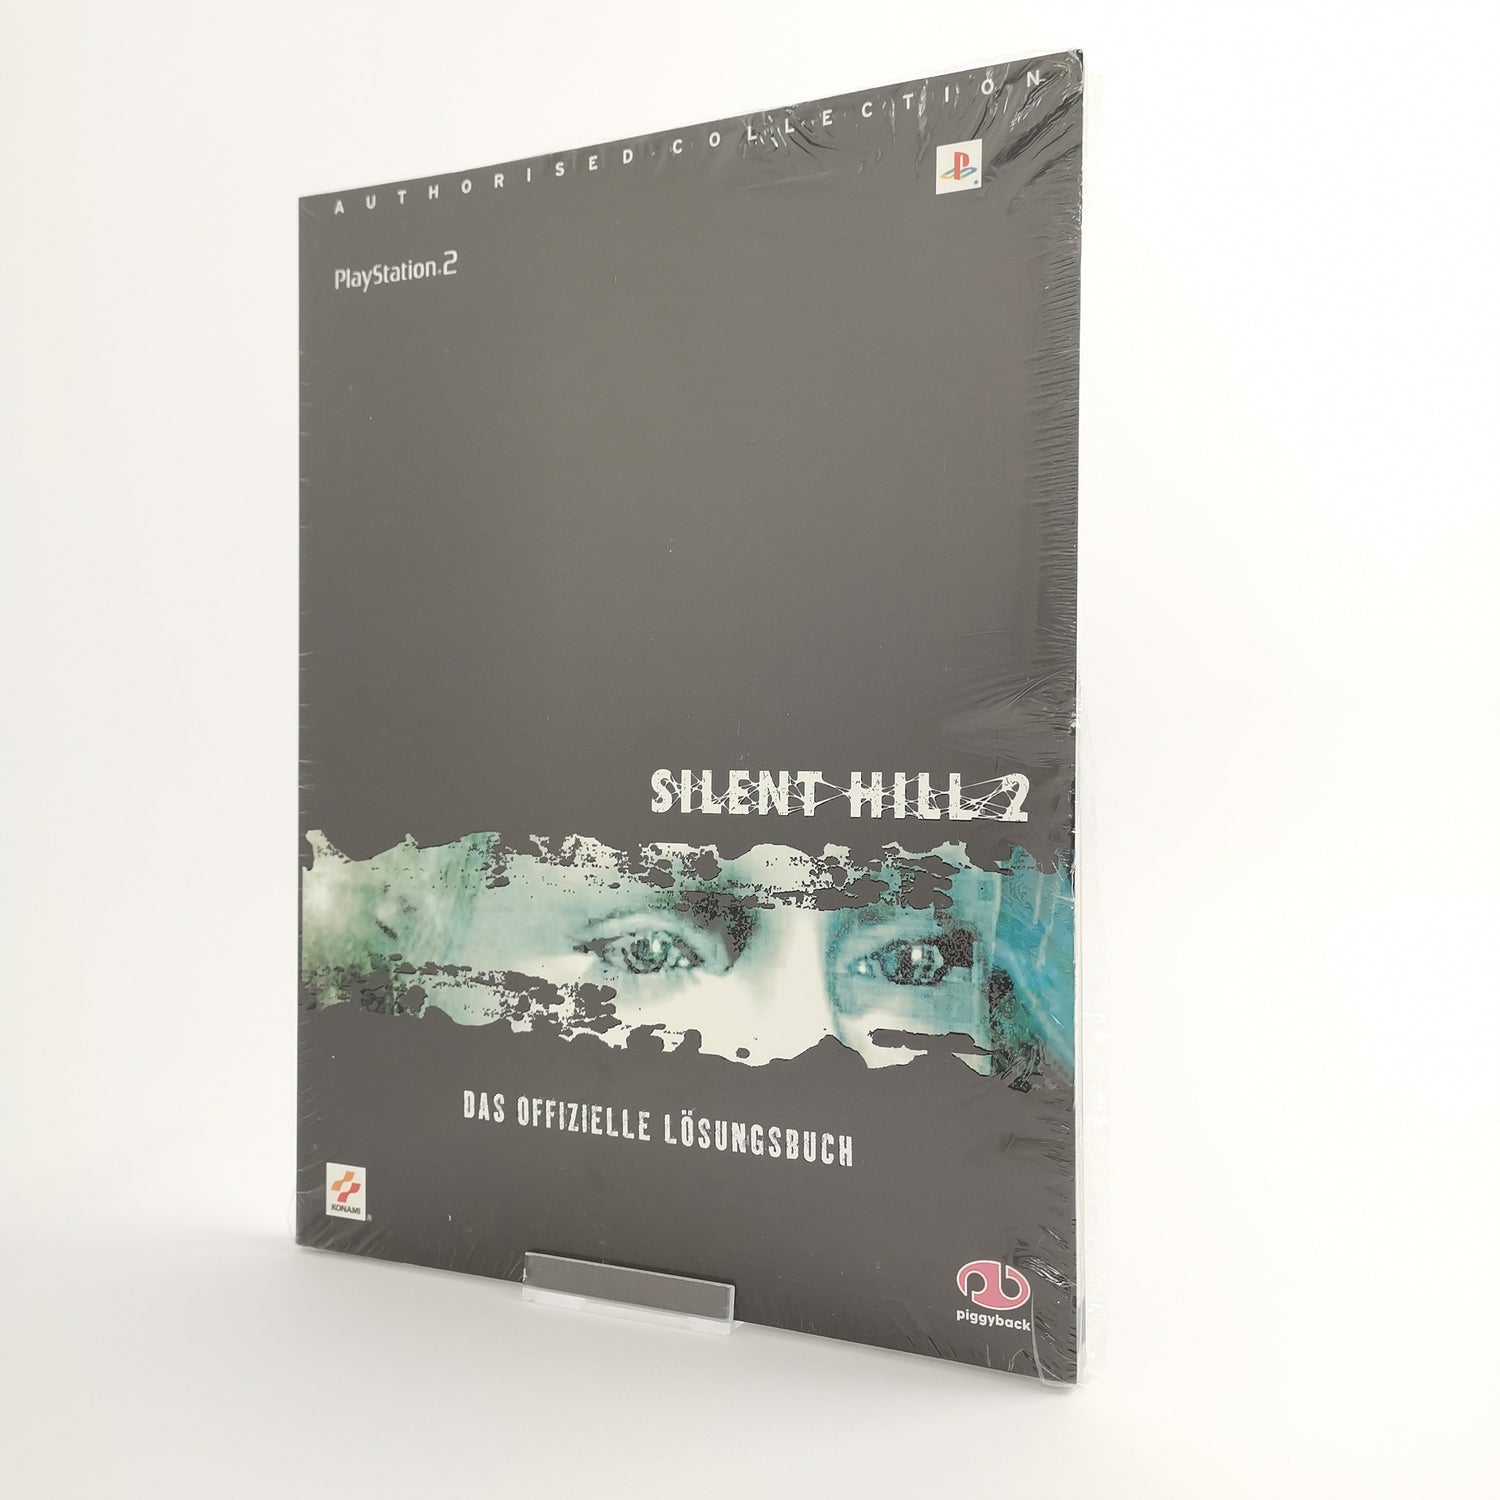 Sony Playstation 2 Guide: the official walkthrough book for Silent Hill 2 | PS2 NEW